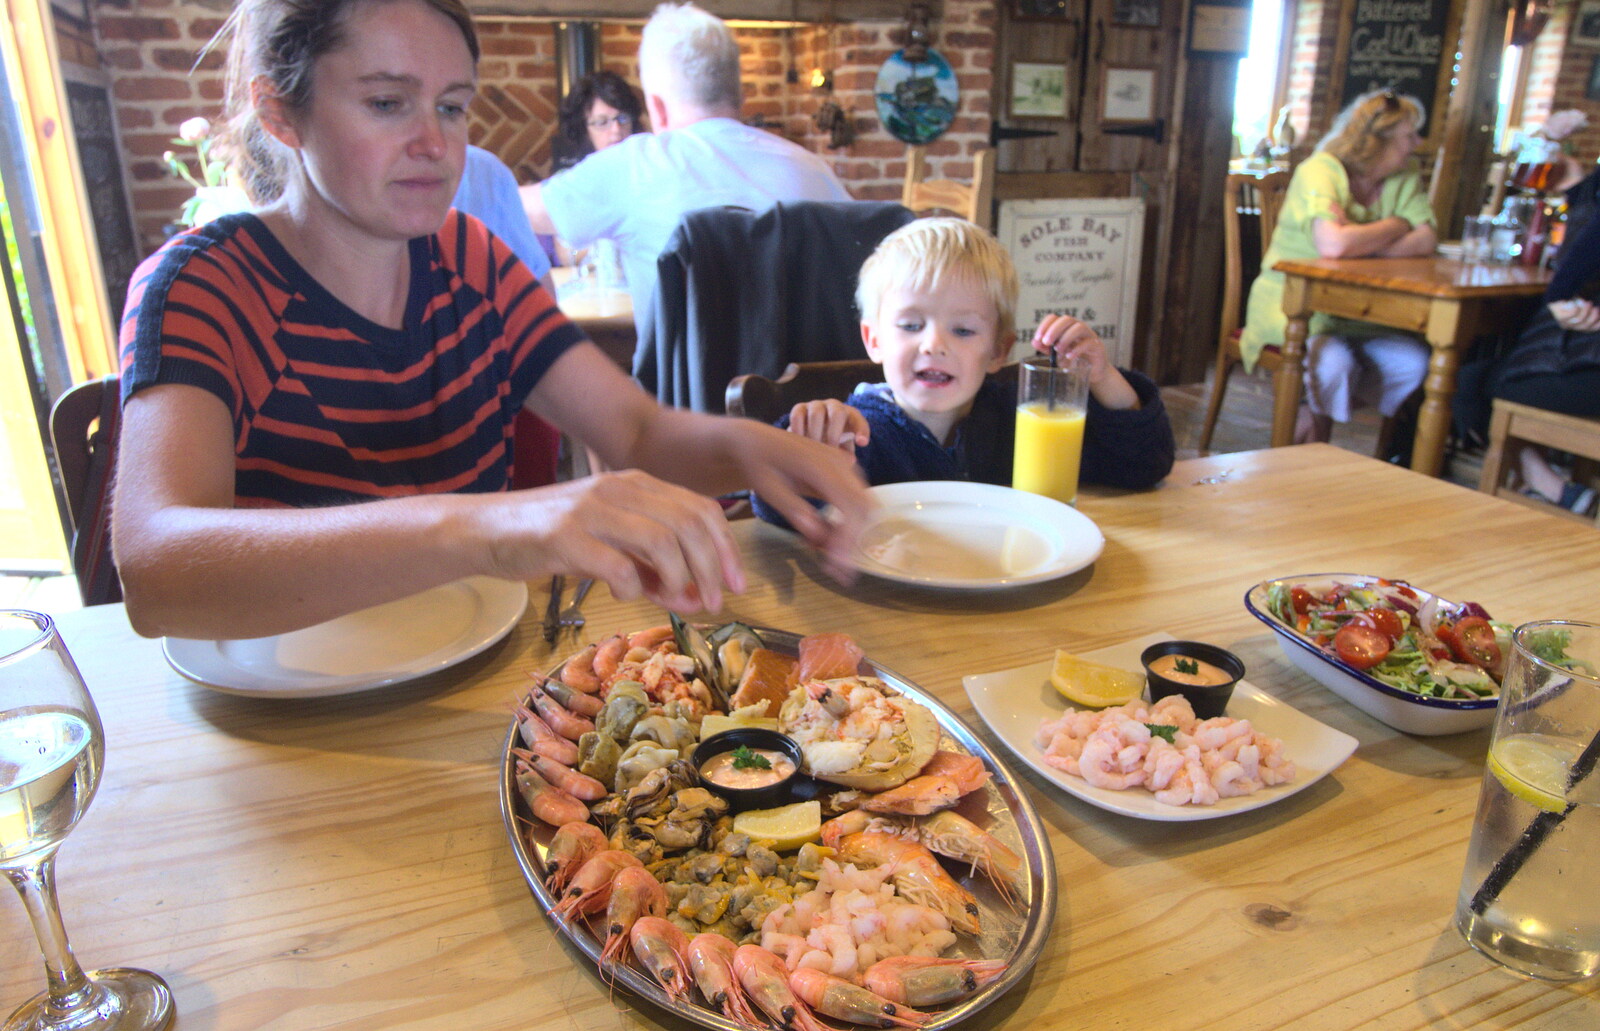 We order a modest seafood platter for two from The Danger of Trees: A Camping (Mis)adventure - Southwold, Suffolk - 3rd August 2015